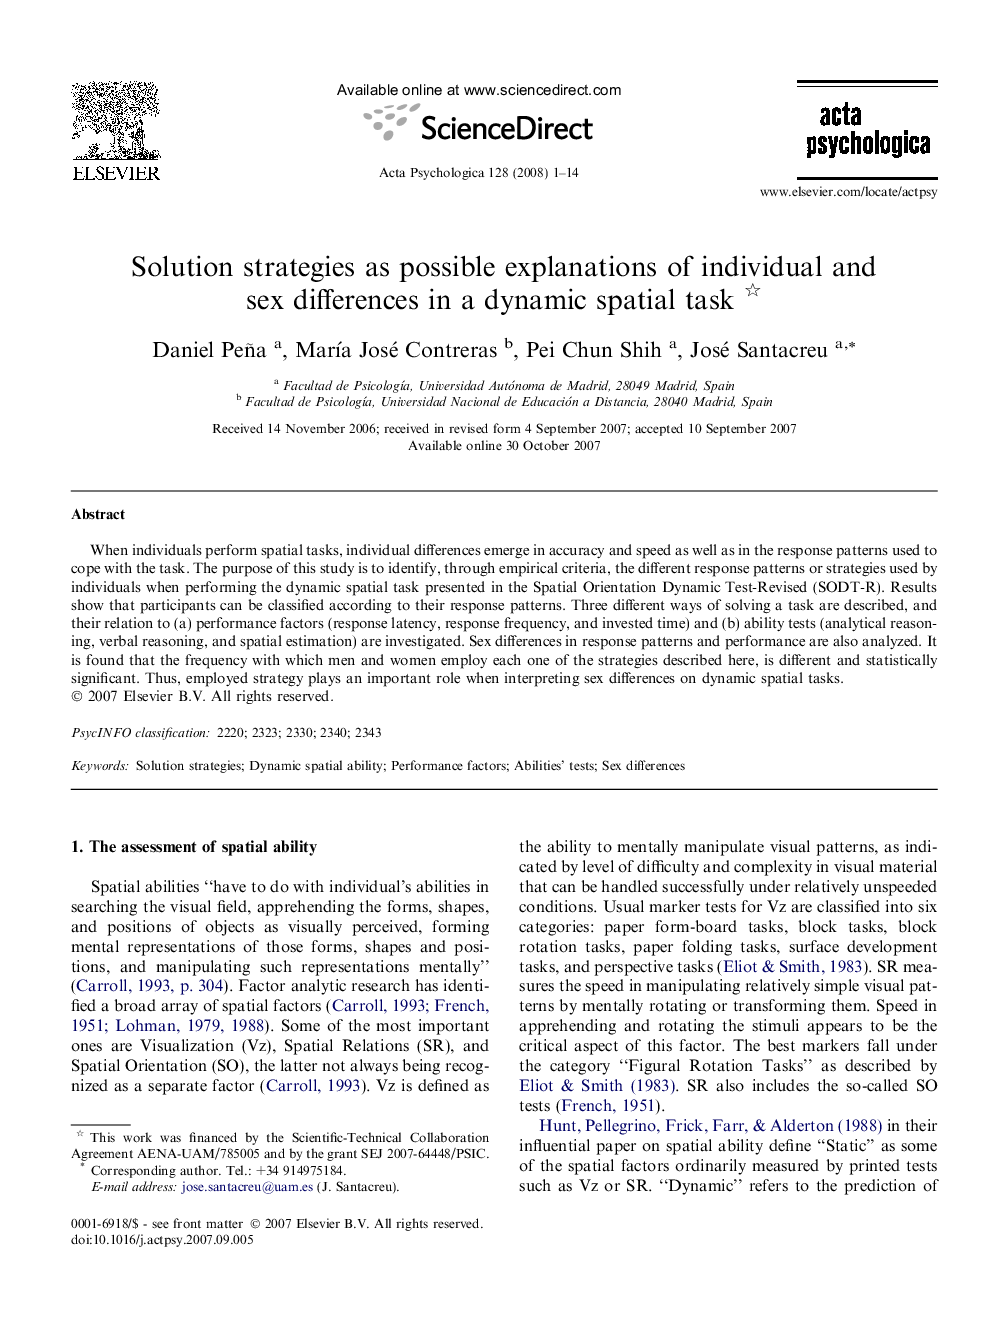 Solution strategies as possible explanations of individual and sex differences in a dynamic spatial task 